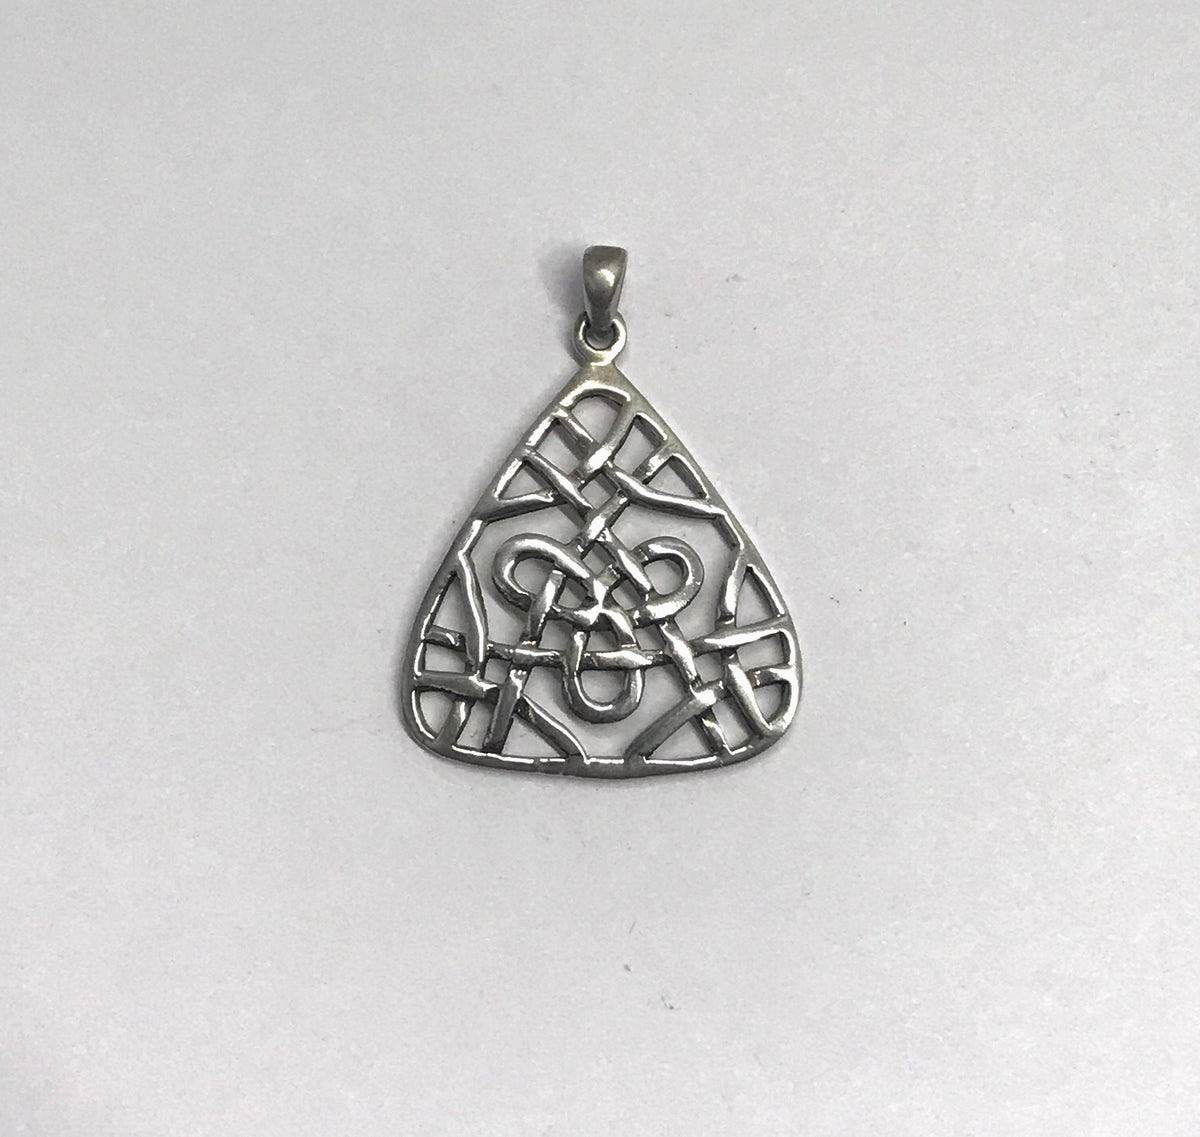 Triangular Celtic Knot Sterling Silver Pendant - Hers and His Treasures